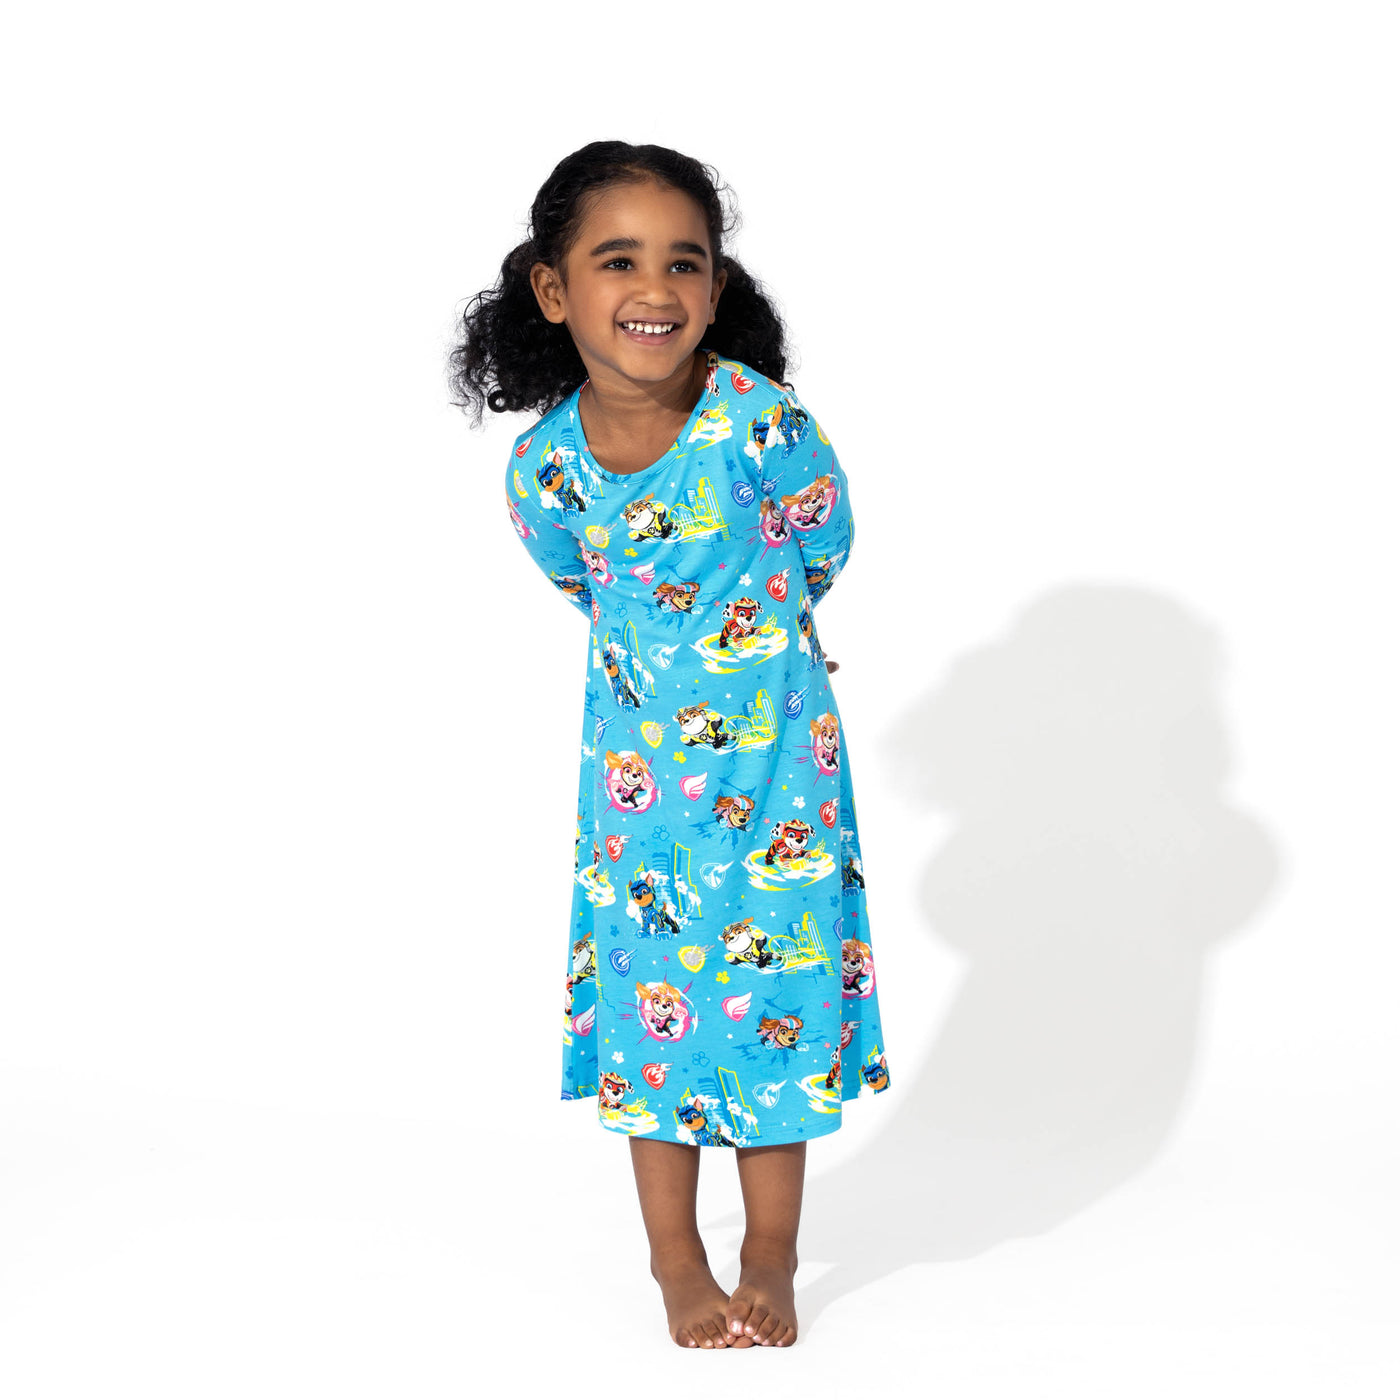 PAW Patrol: The Mighty Movie - Mighty Pups Bamboo Girls' Dress